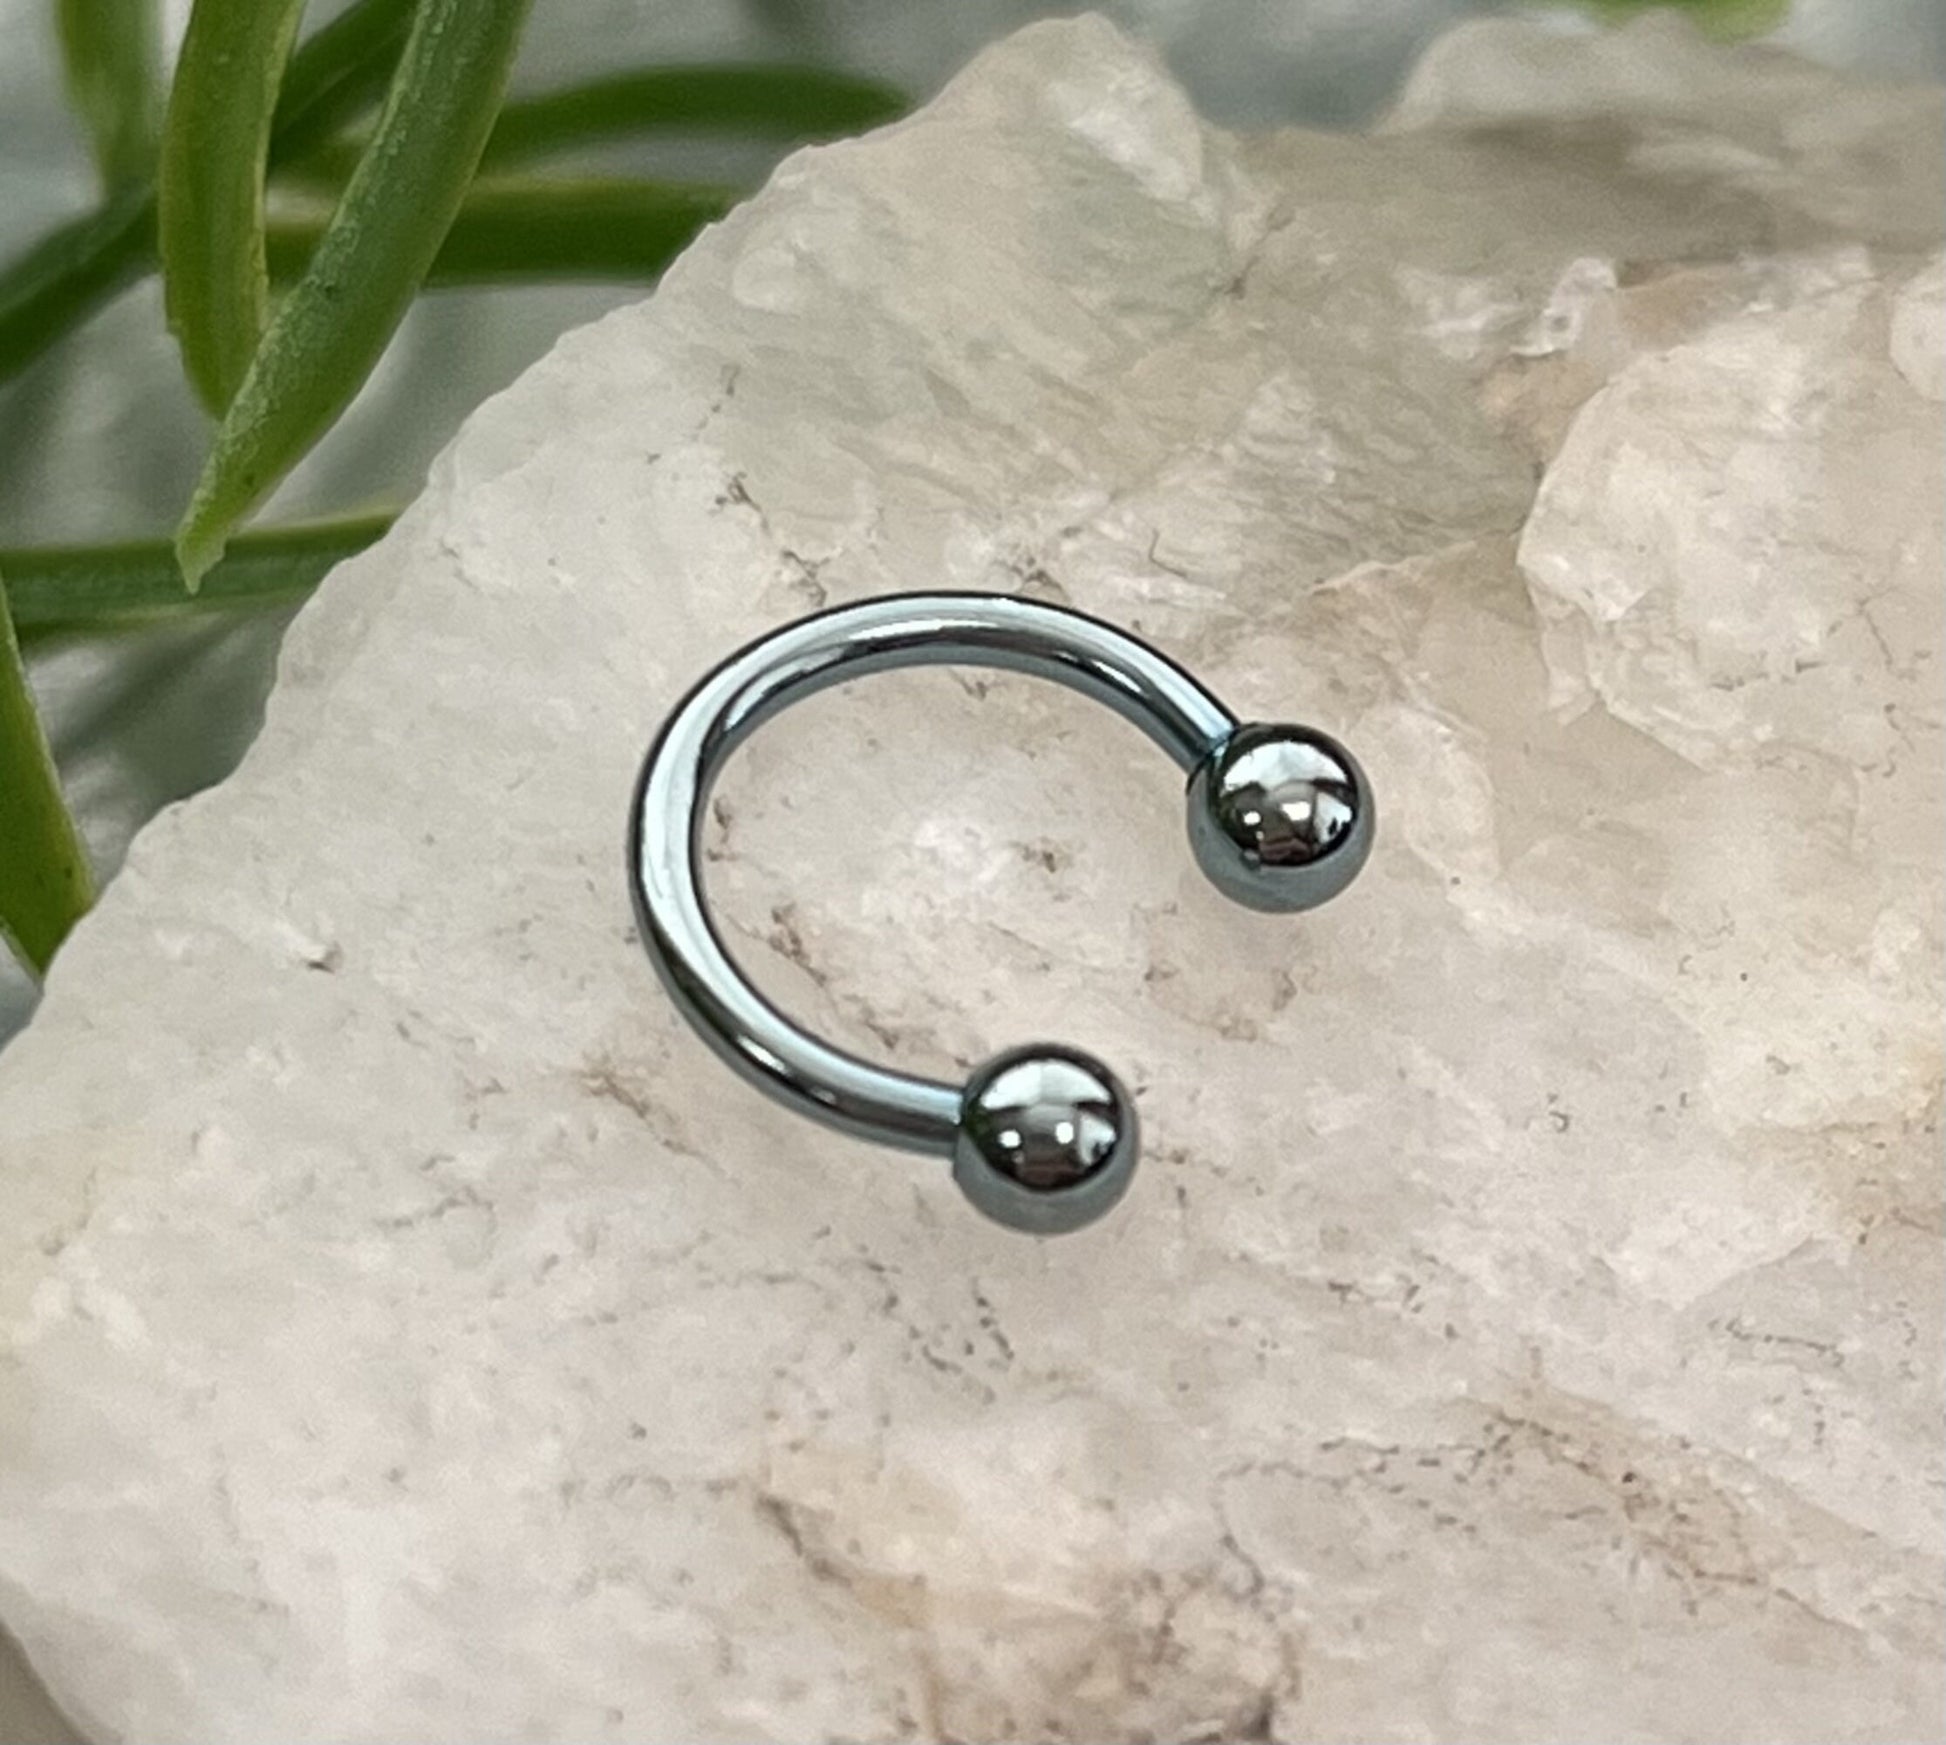 PAIR of Beautiful Light Blue Titanium Anodized Circular Barbell Horseshoe Ring - 18g thru 14g with Assorted Ball Sizes!!